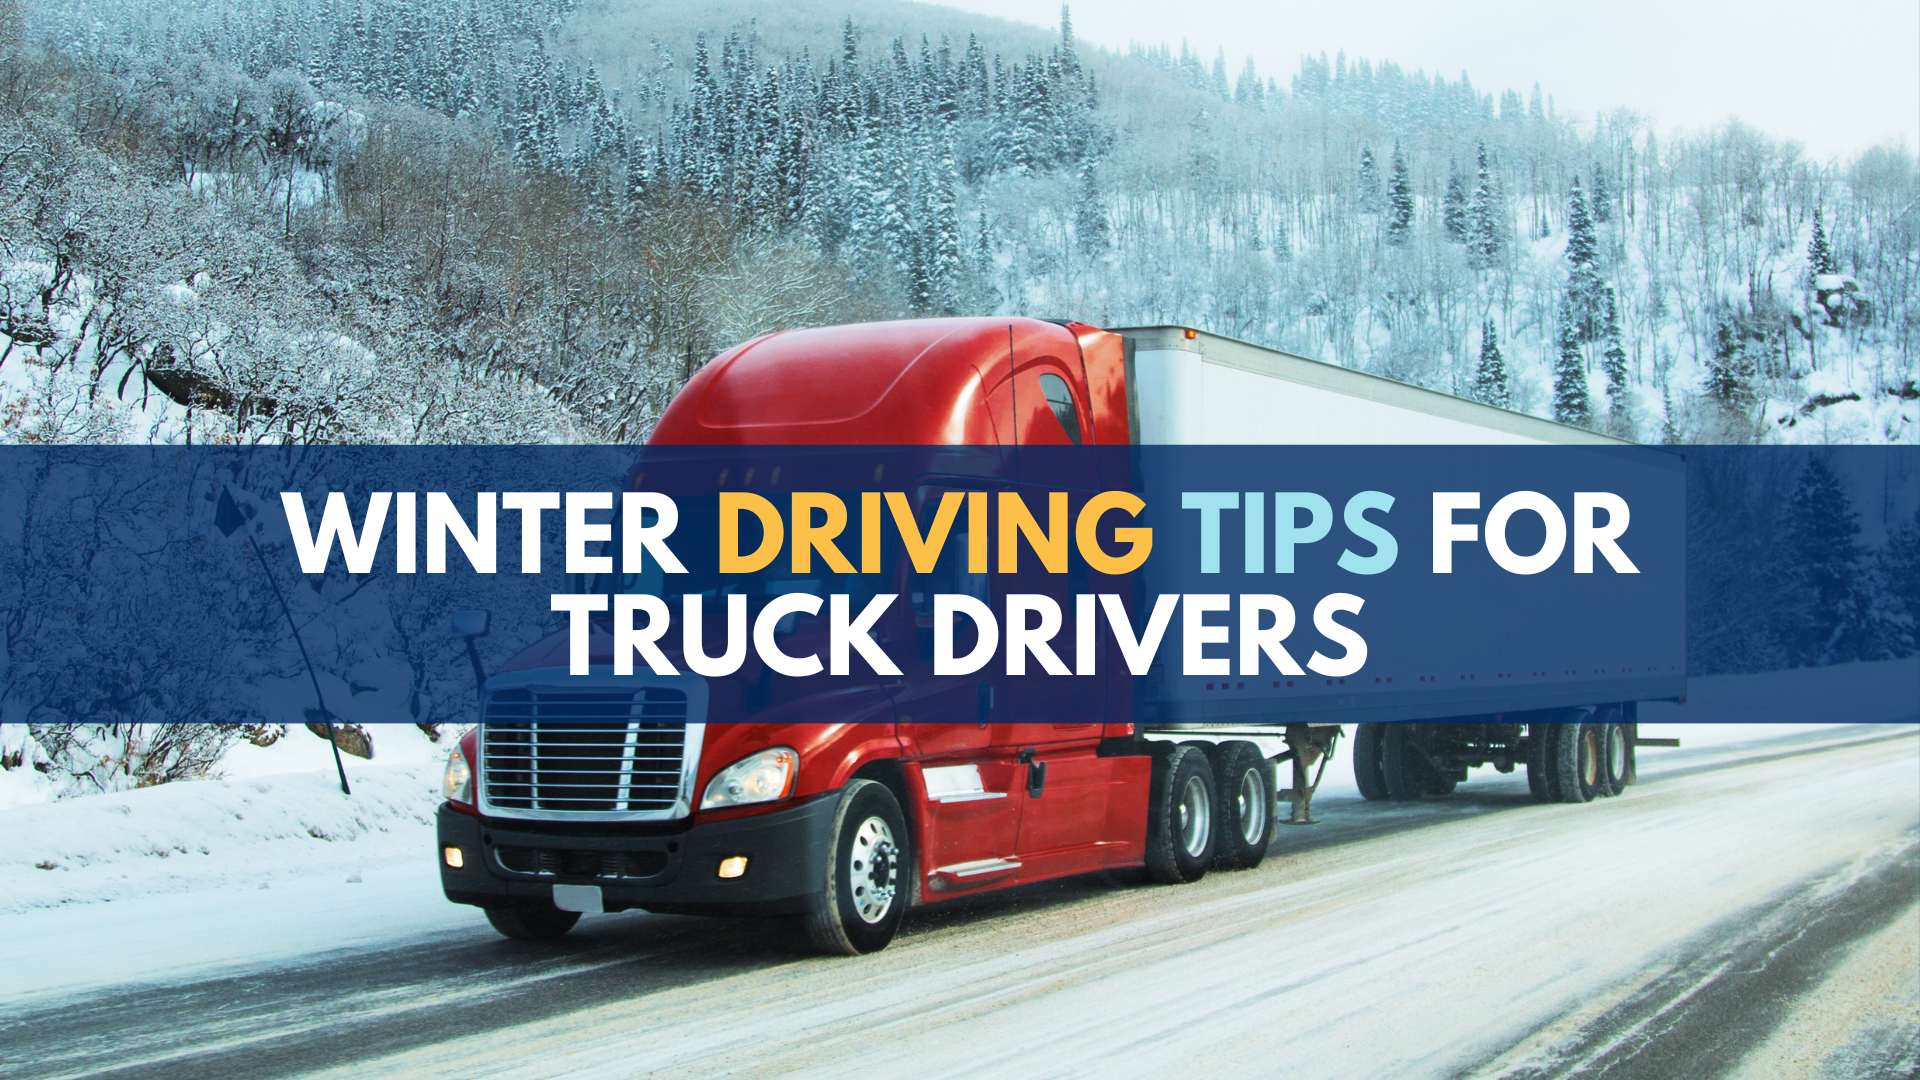 https://www.michiganautolaw.com/wp-content/uploads/2020/01/Winter-Tips-Truck-Drivers-1920x1080-1.png